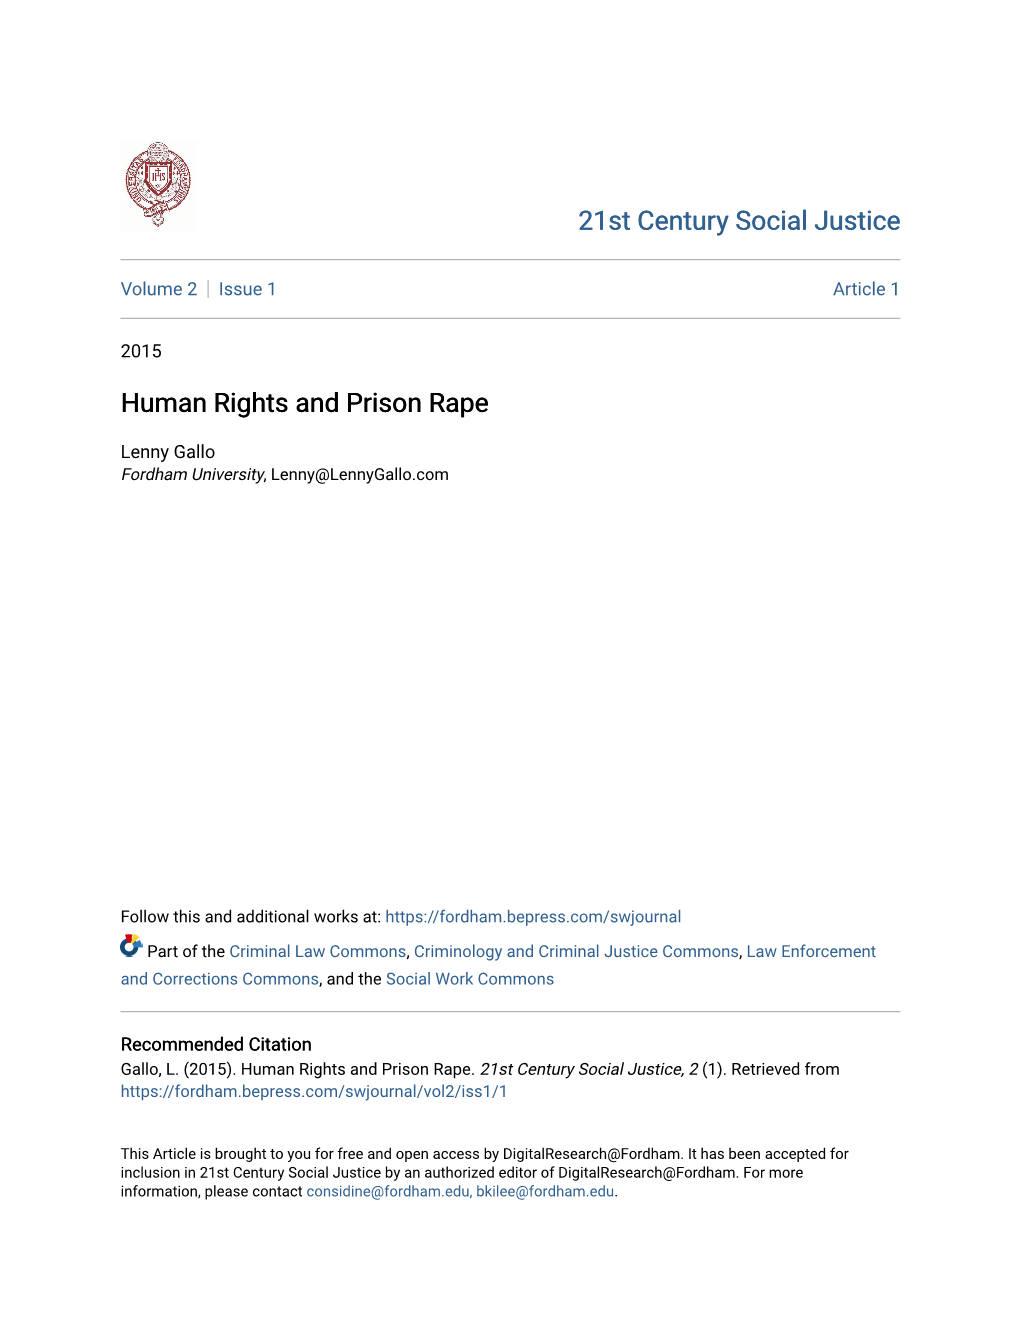 Human Rights and Prison Rape